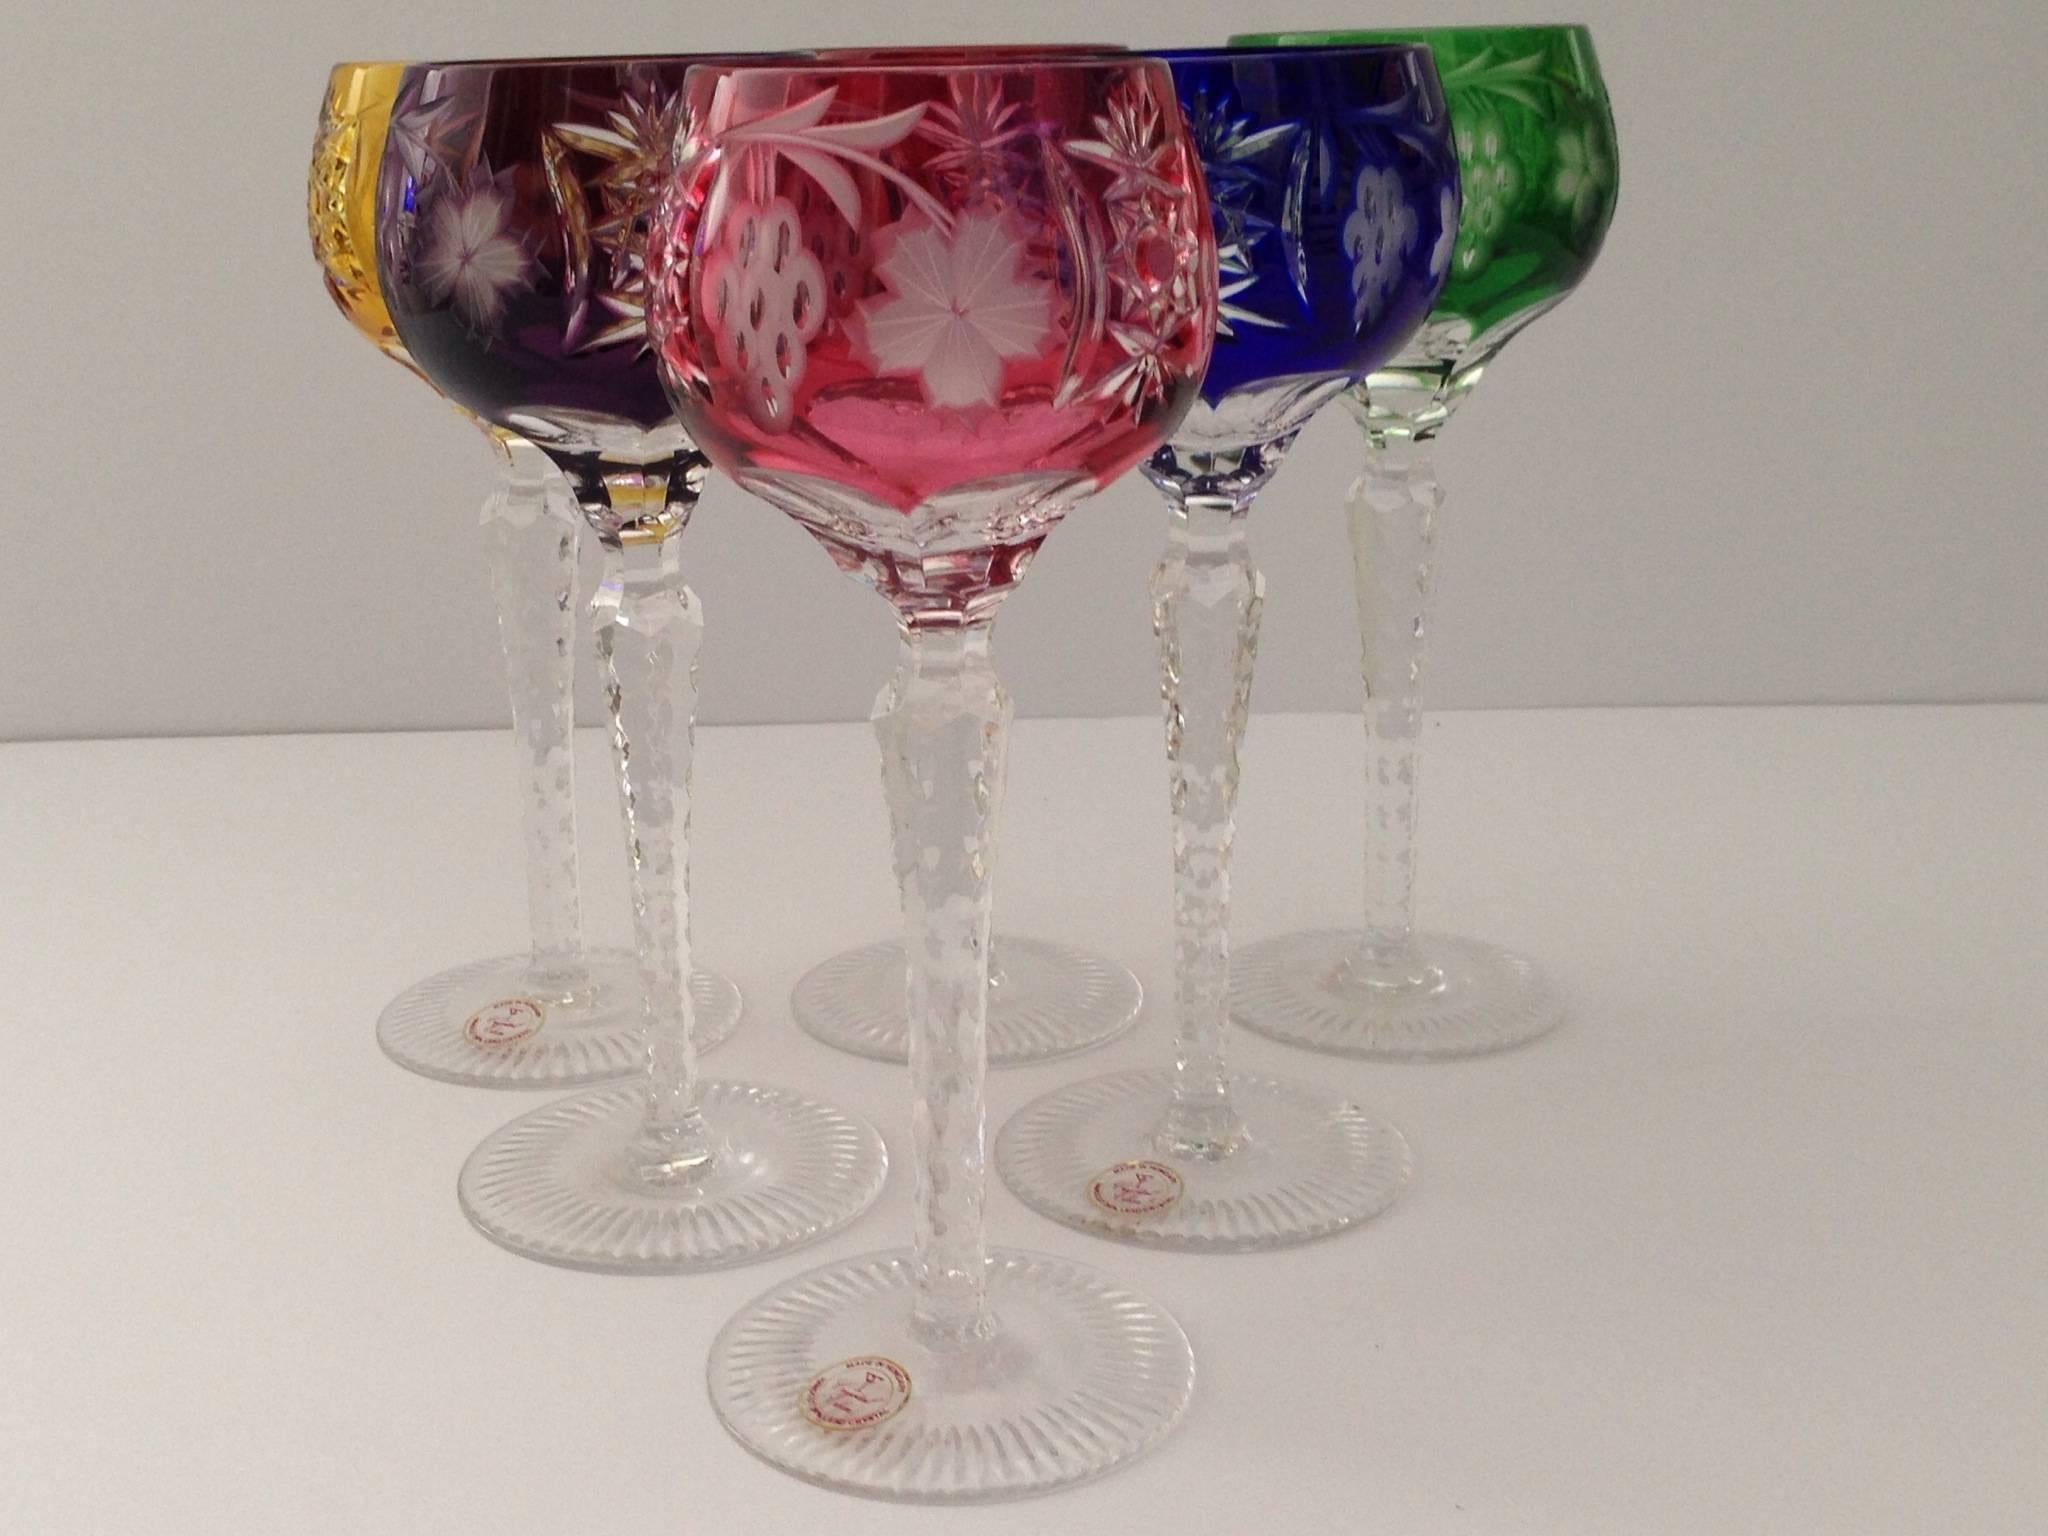 Vibrant set of five cut crystal Bohemia glass hock wine stem goblets. Set includes one of each color, amethyst, green, yellow, cobalt and ruby in a starburst and grapevine pattern.